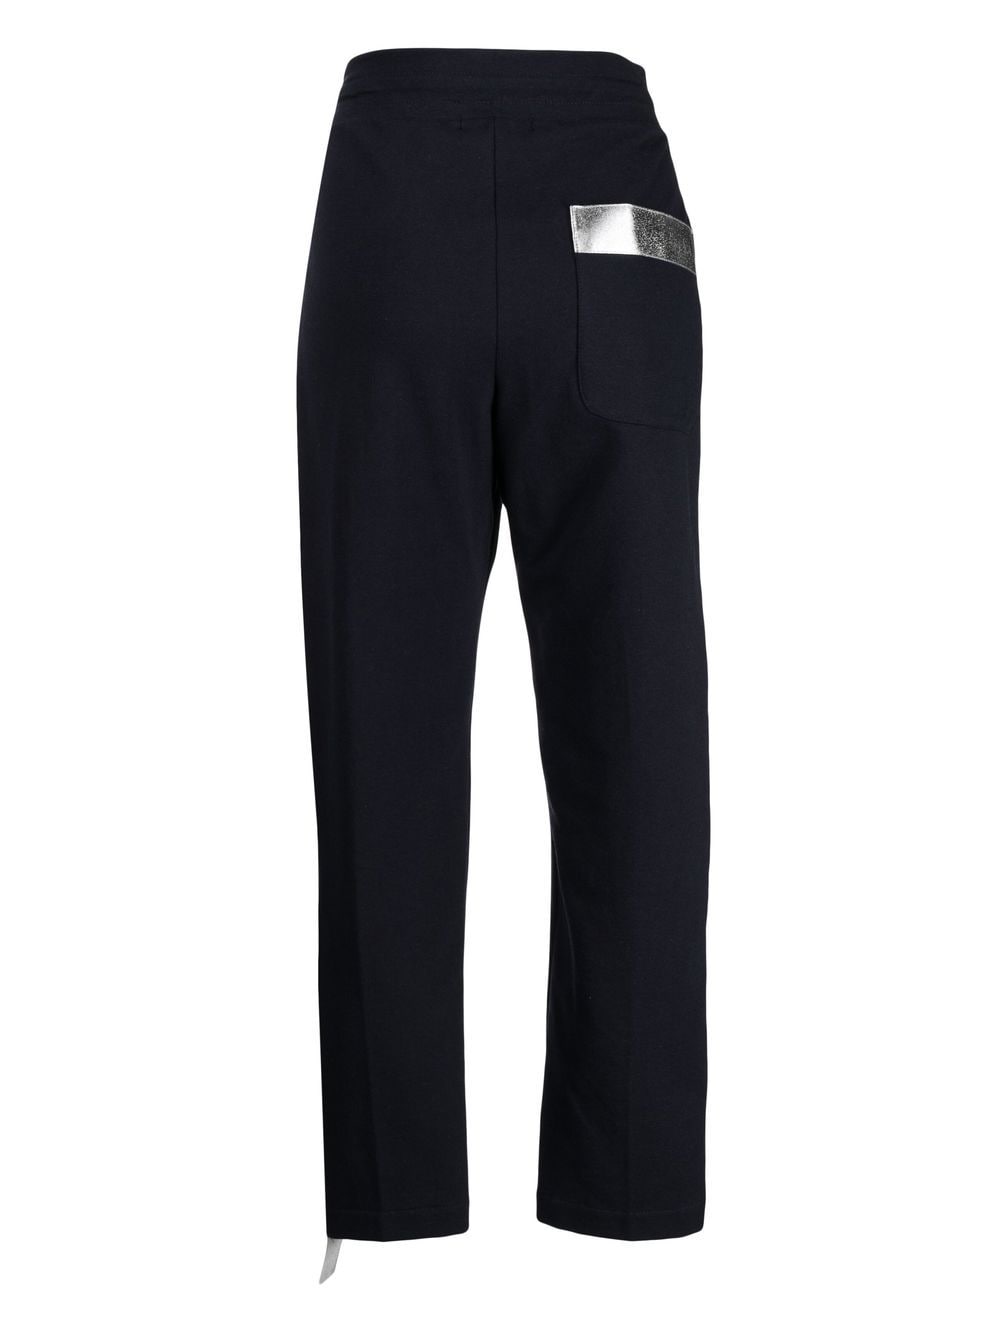 LAMINATED-BAND COTTON TROUSERS